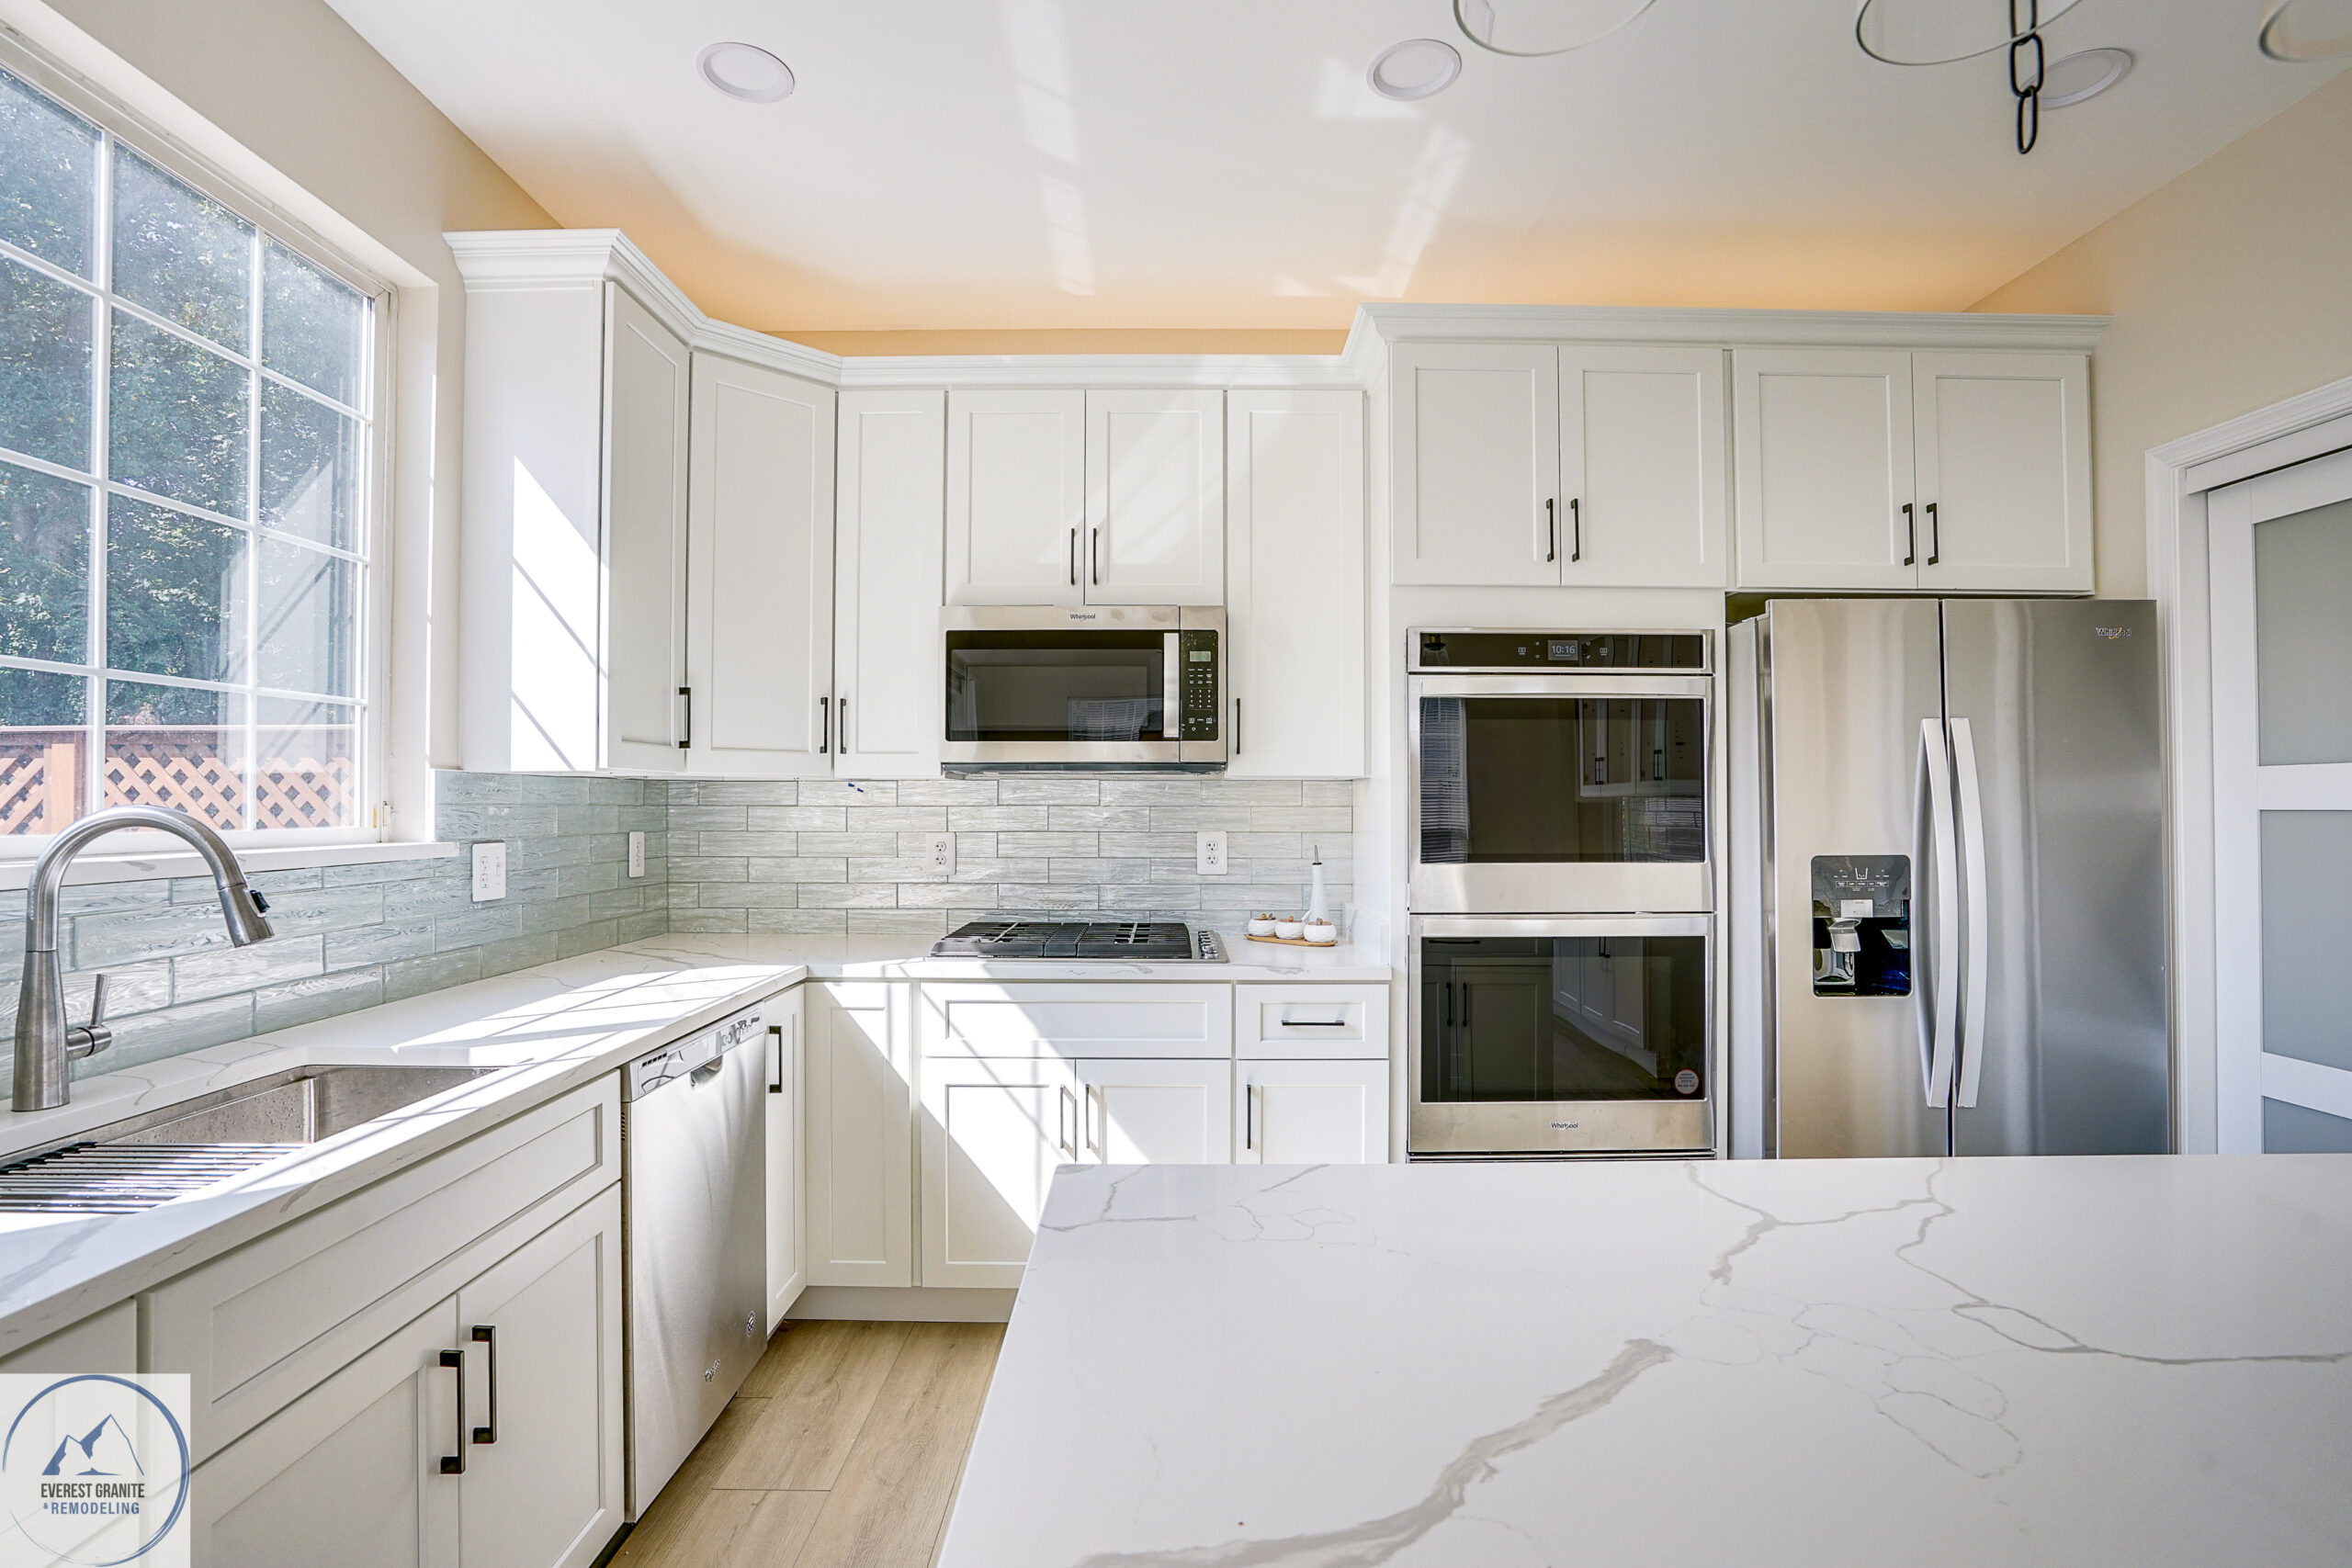 Custom Cabinets vs. Prefab Cabinets: What’s Right for You?